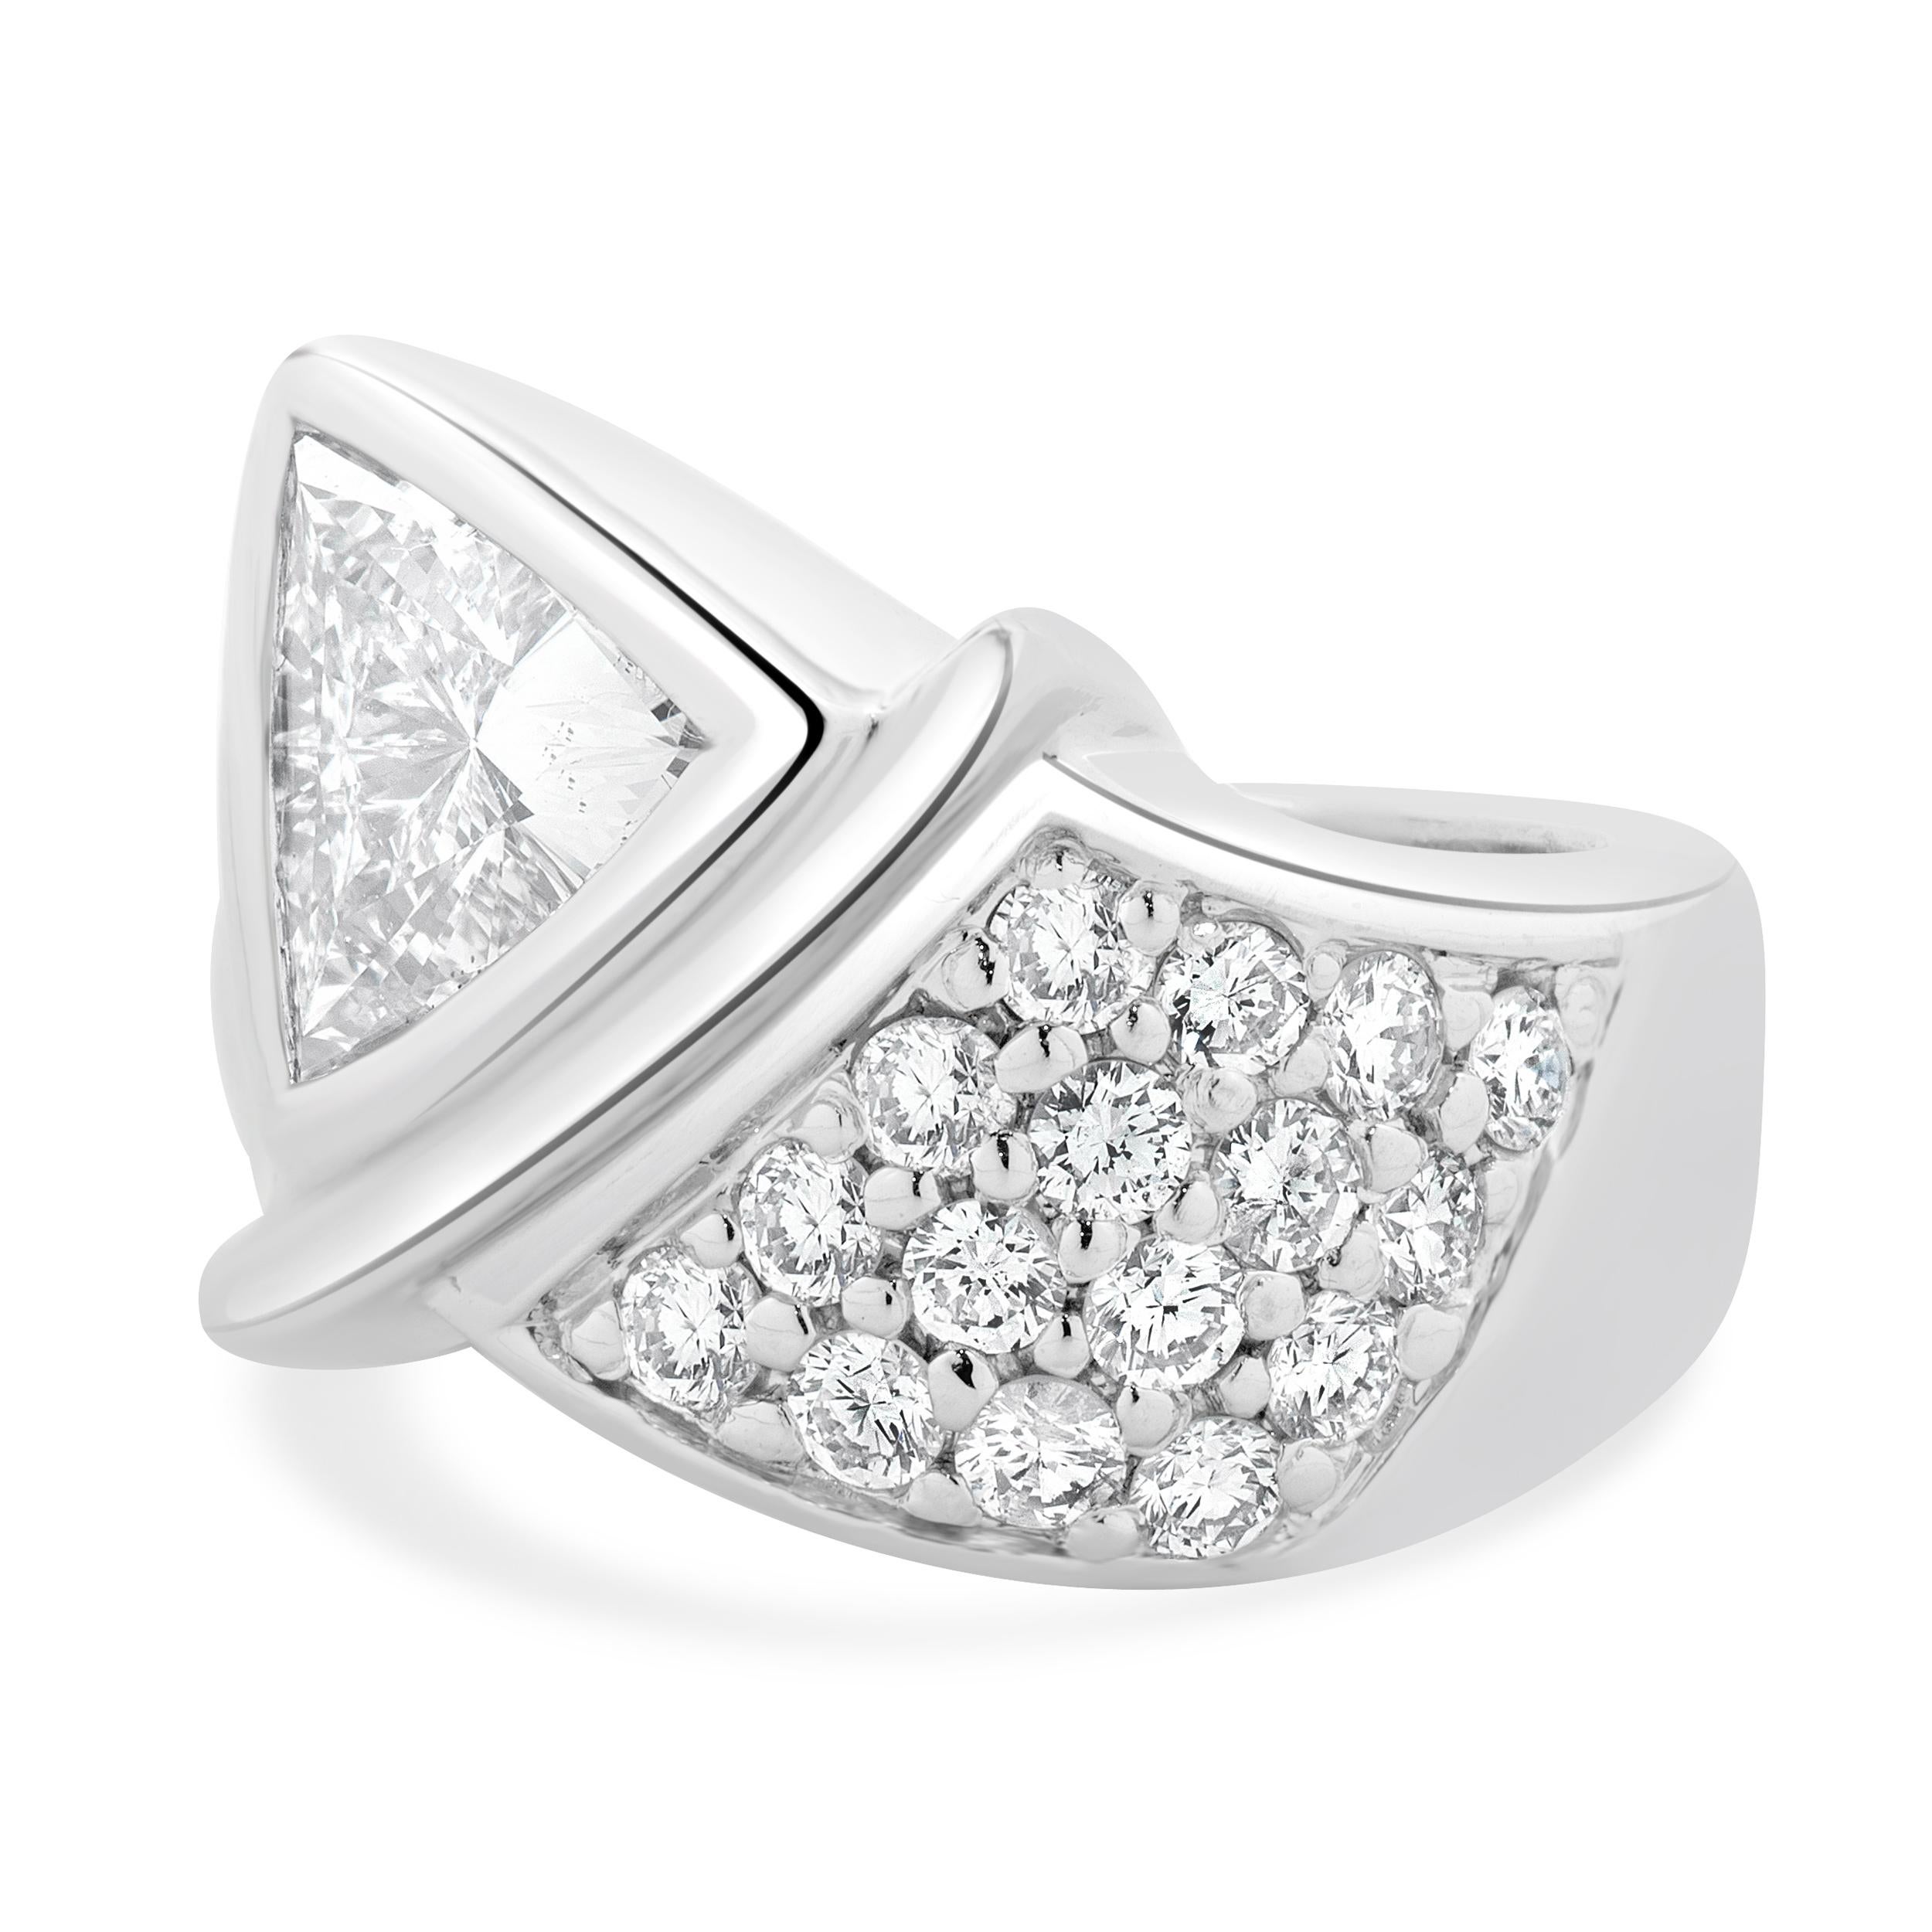 Designer: Custom
Material: Platinum
Diamond: 1 trillion cut = 1.55ct
Color: H
Clarity: SI2
Diamond: 16 round brilliant cut = 0.64cttw
Color: G
Clarity: SI1-2
Dimensions: ring top measures 16.5mm wide
Ring Size: 6.25 (complimentary sizing